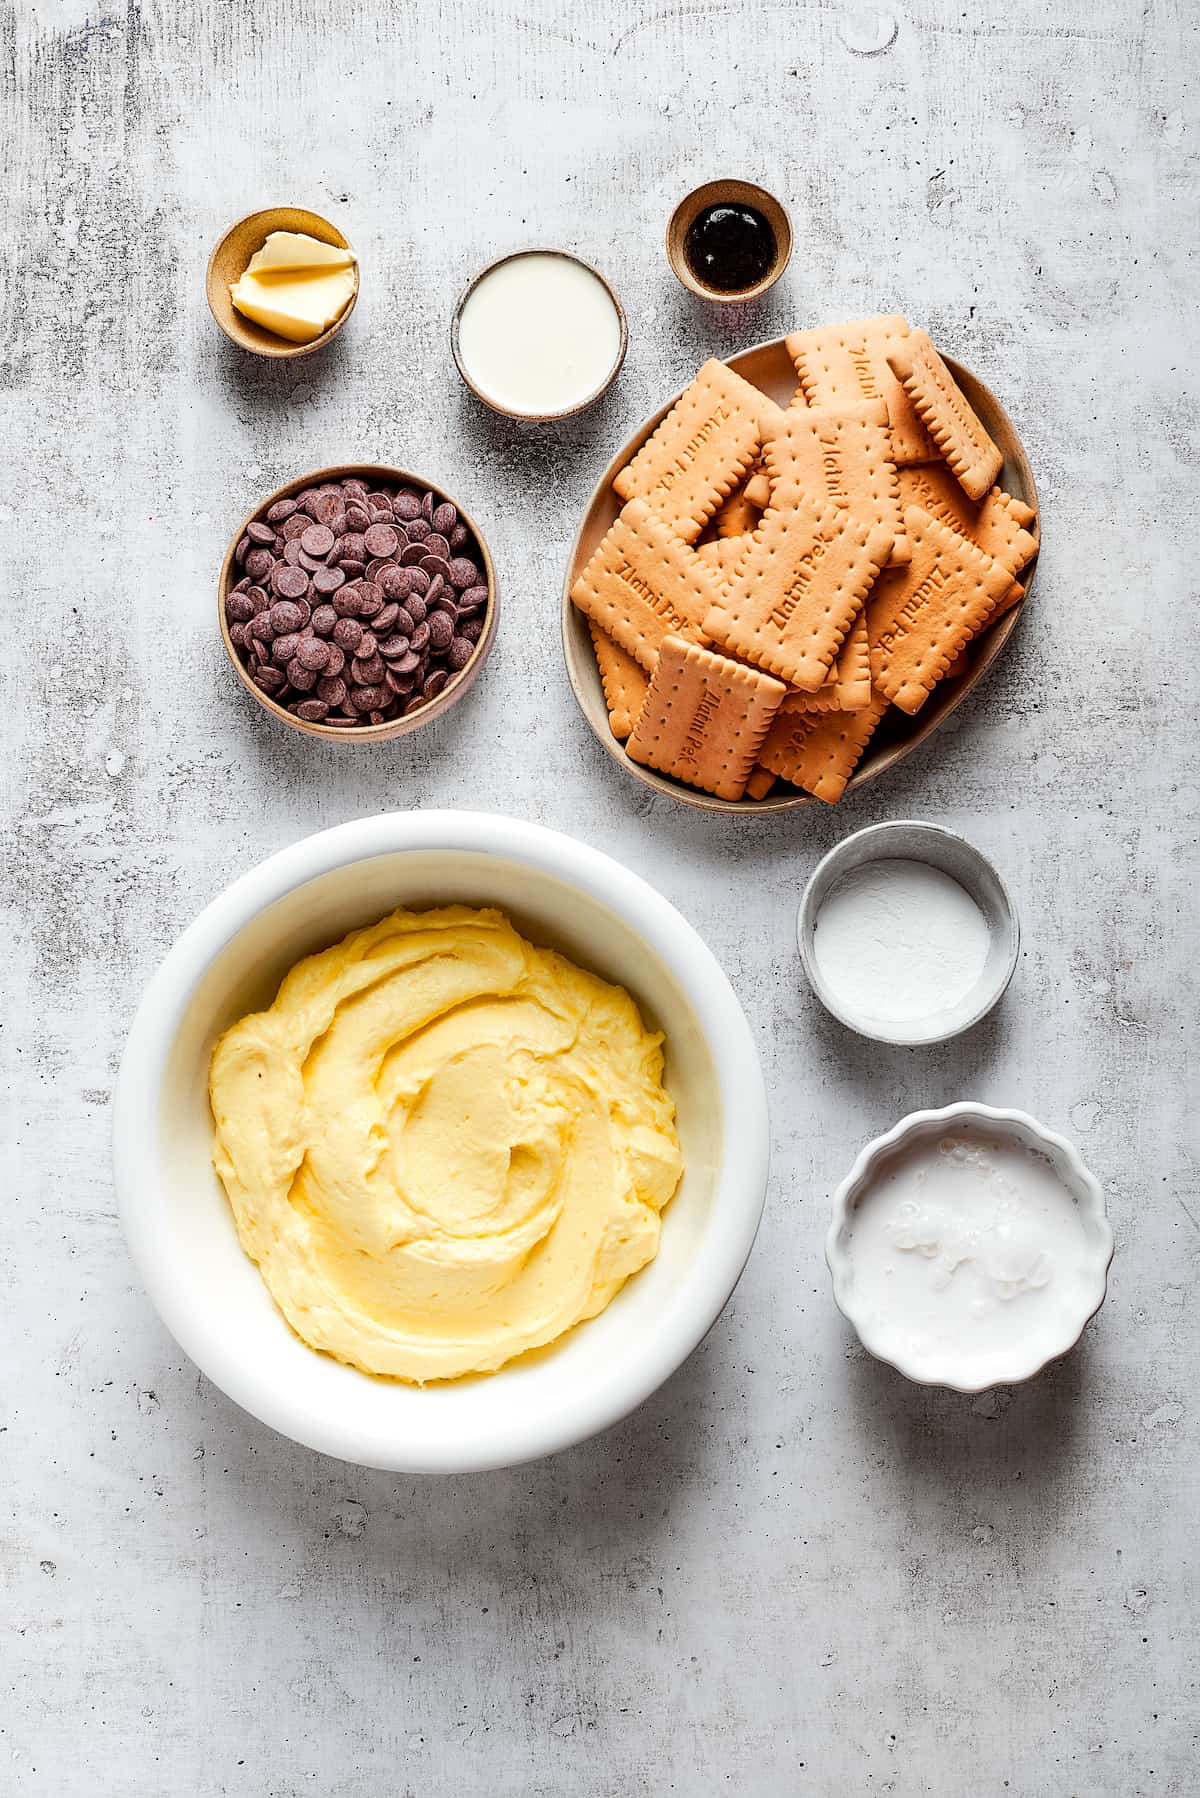 Overhead view of the ingredients needed for chocolate eclair cake: a bowl of vanilla pudding, a bowl of cookies, a bowl of chocolate chips, a bowl of cream, a bowl of milk, a bowl of butter, a bowl of vanilla, and a bowl of powdered sugar.